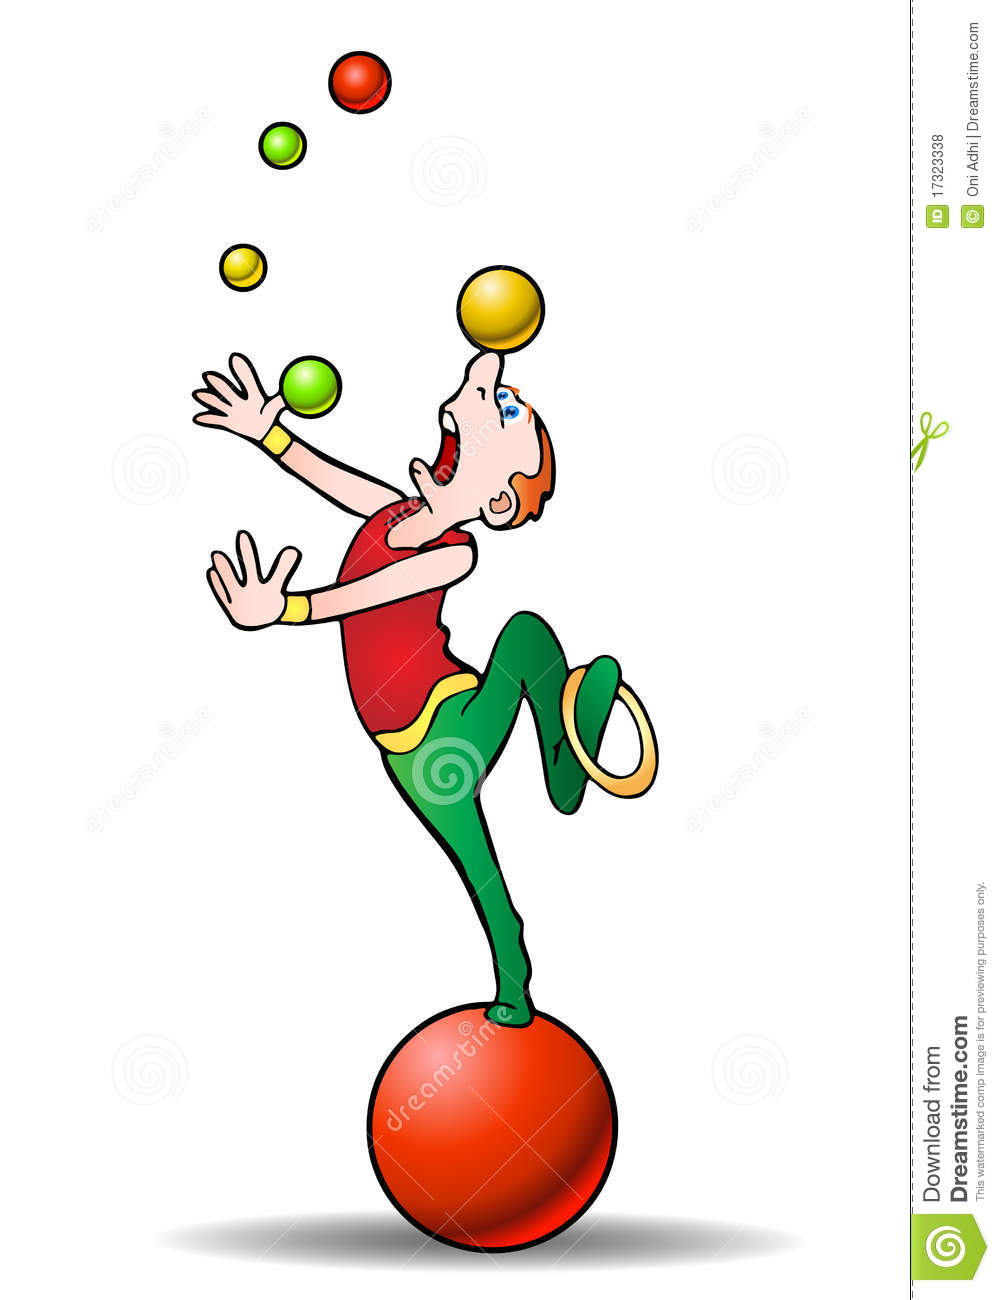 Juggling With Color Balls Acrobat Performer Royalty Free Stock Photos